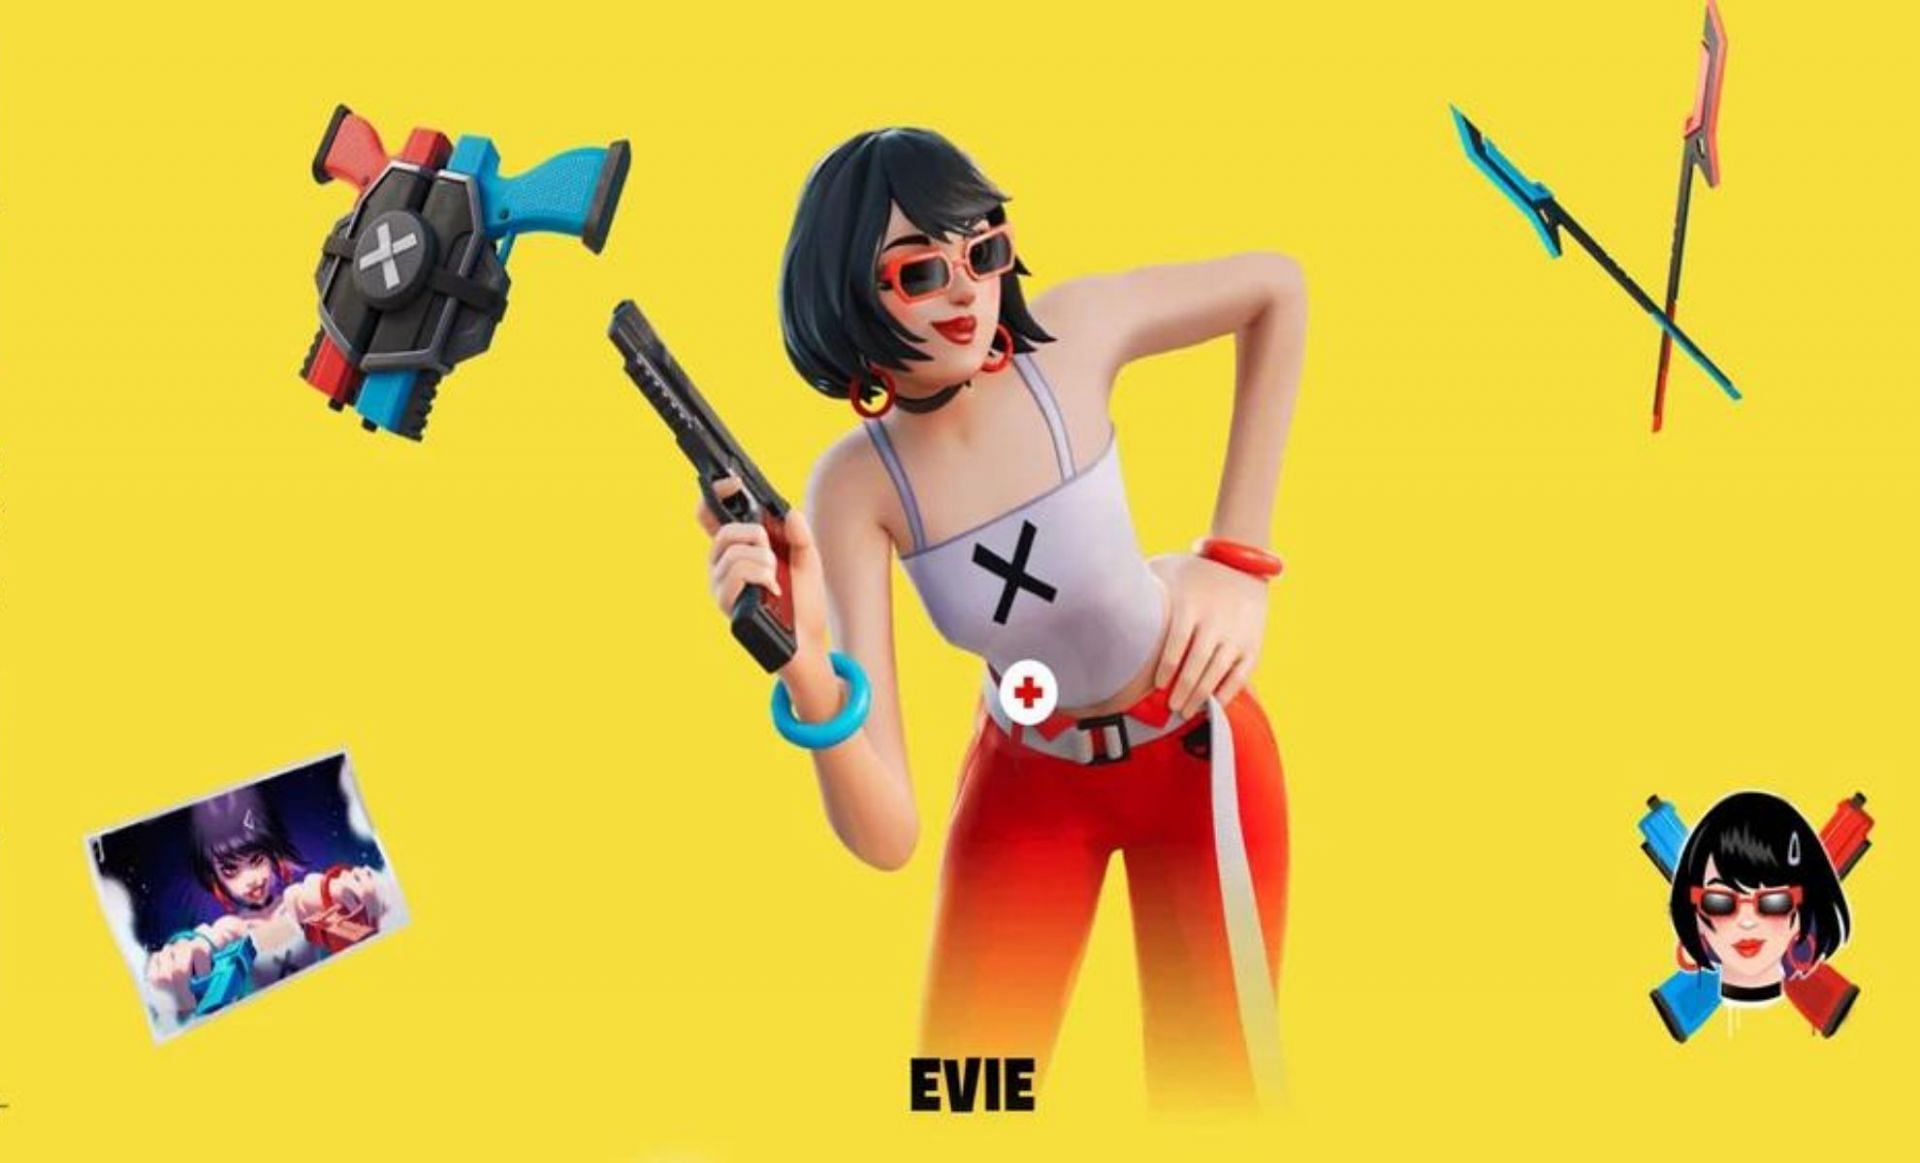 Evie from fortnite